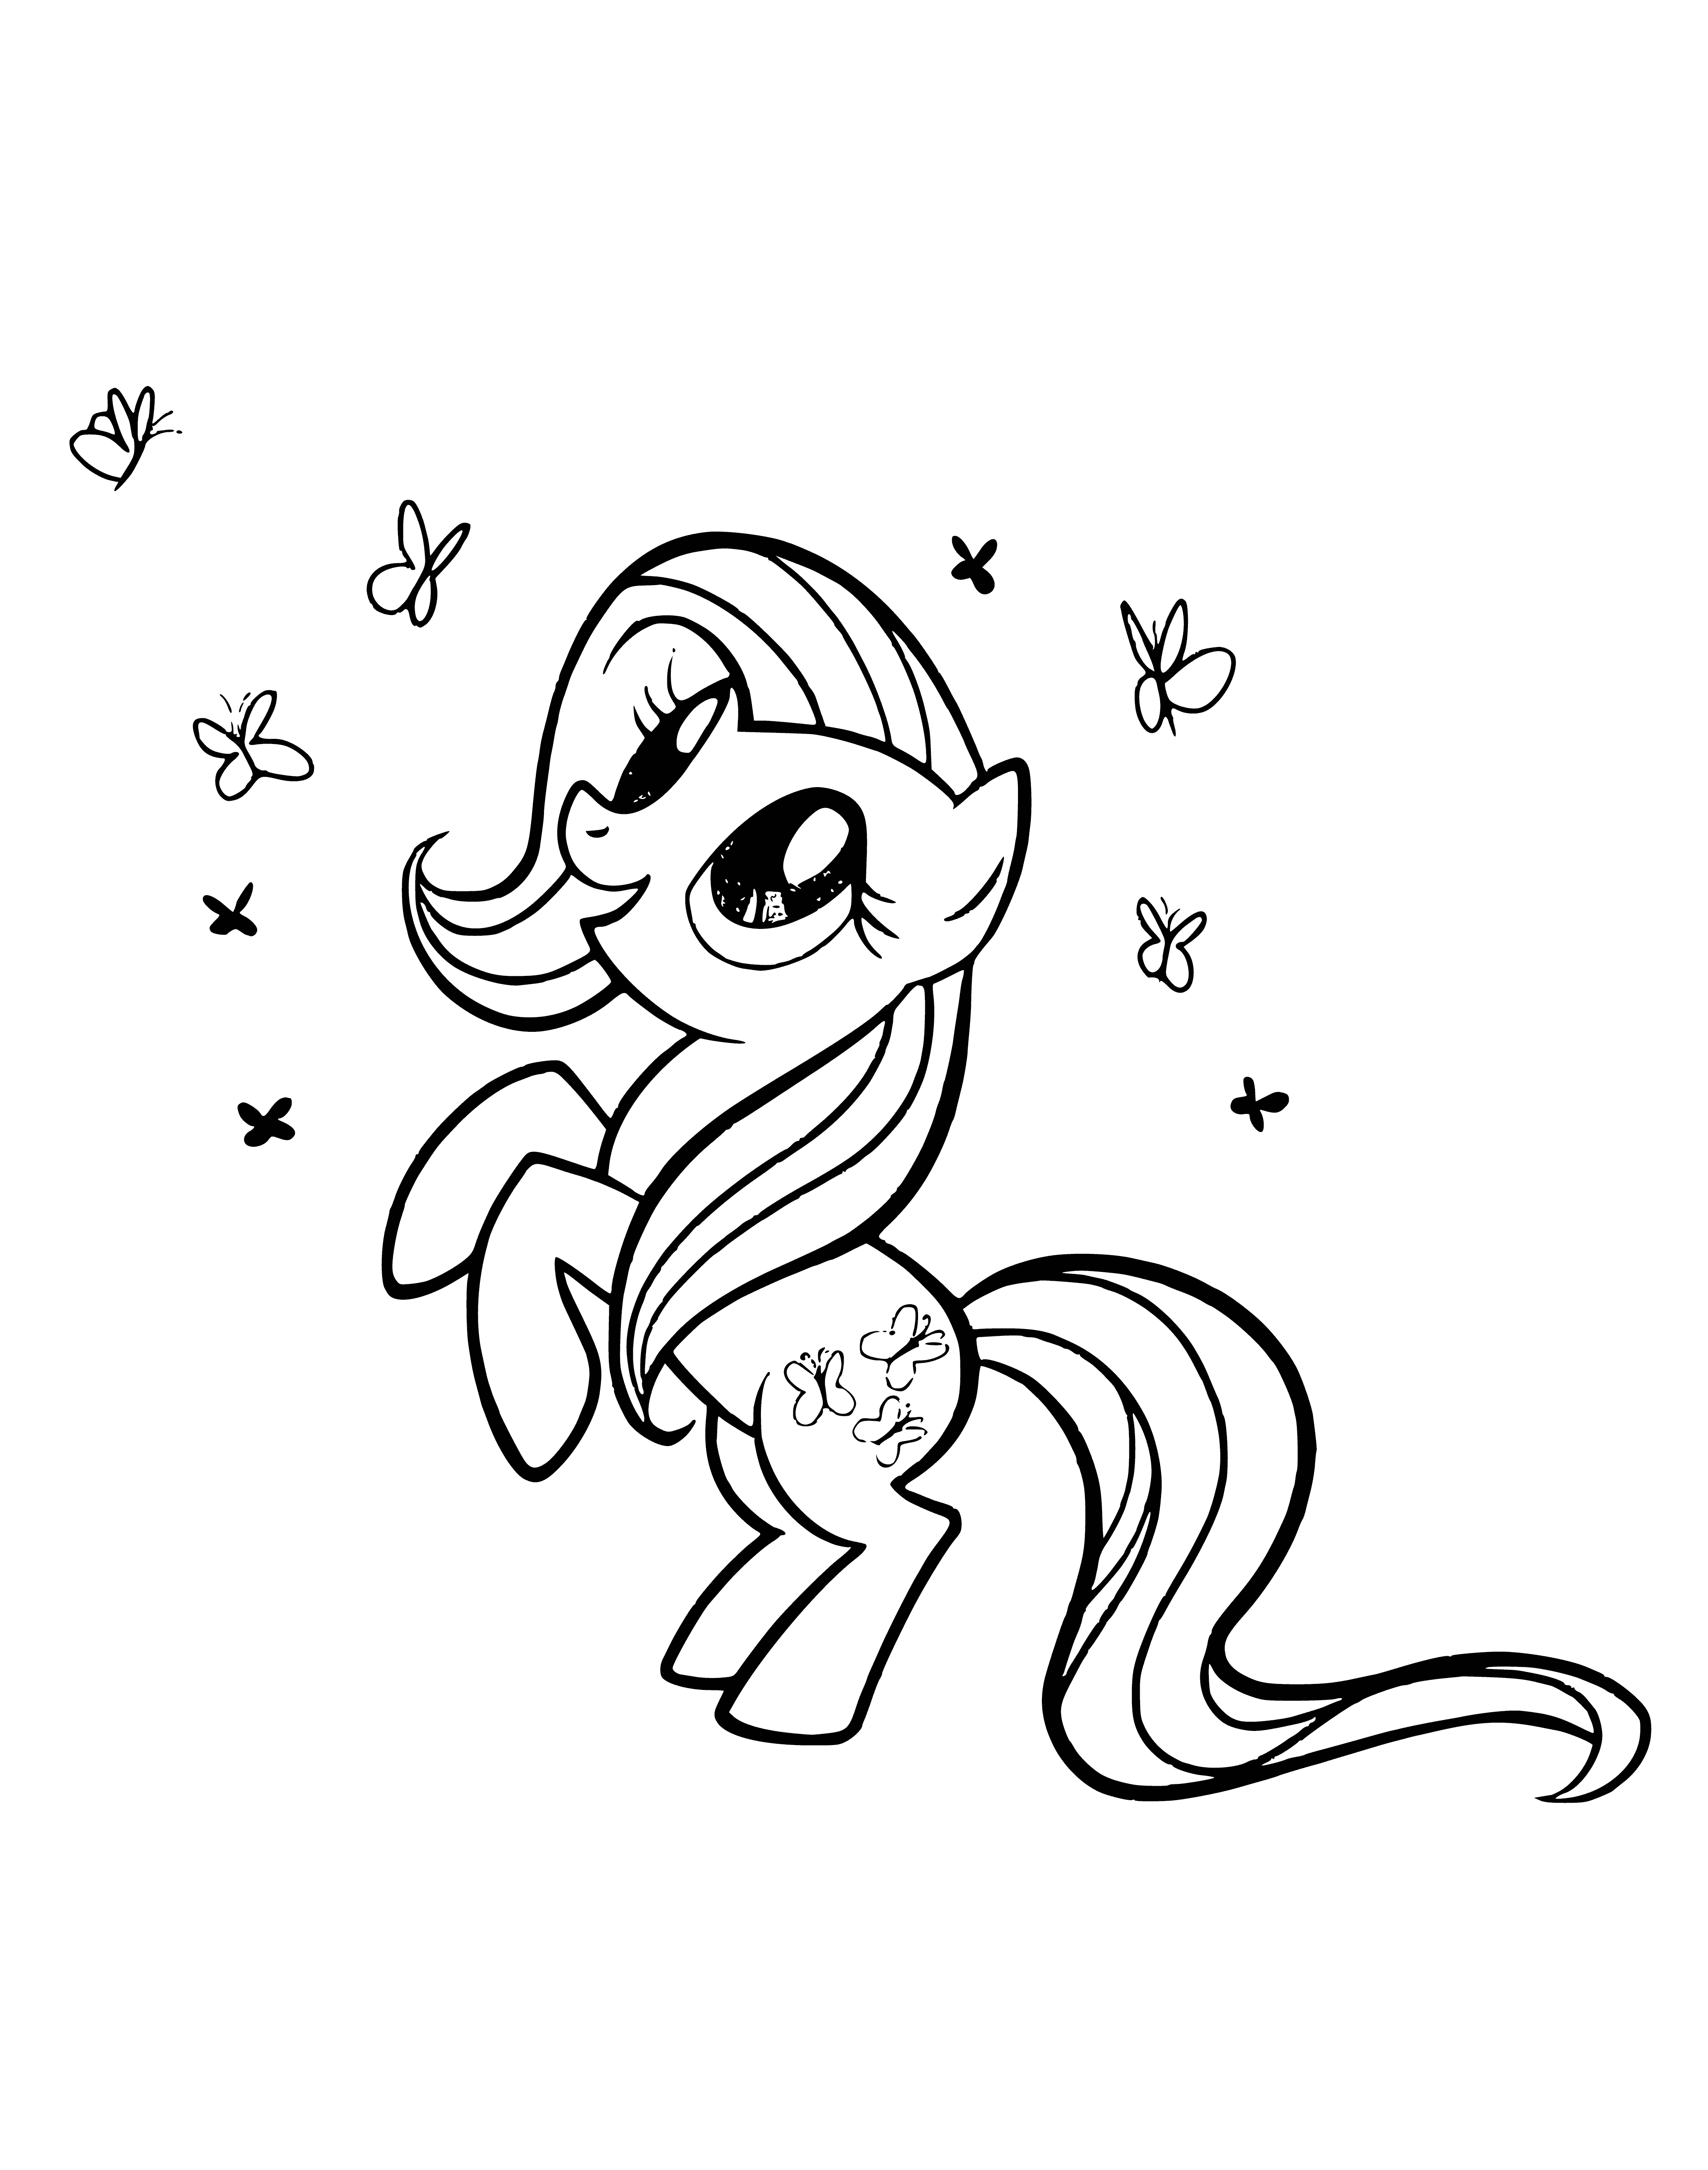 coloring page: Fluttershy, a serene pony, admires butterflies in a forest with tall trees & a stream. A perfect coloring page for MLP fans!